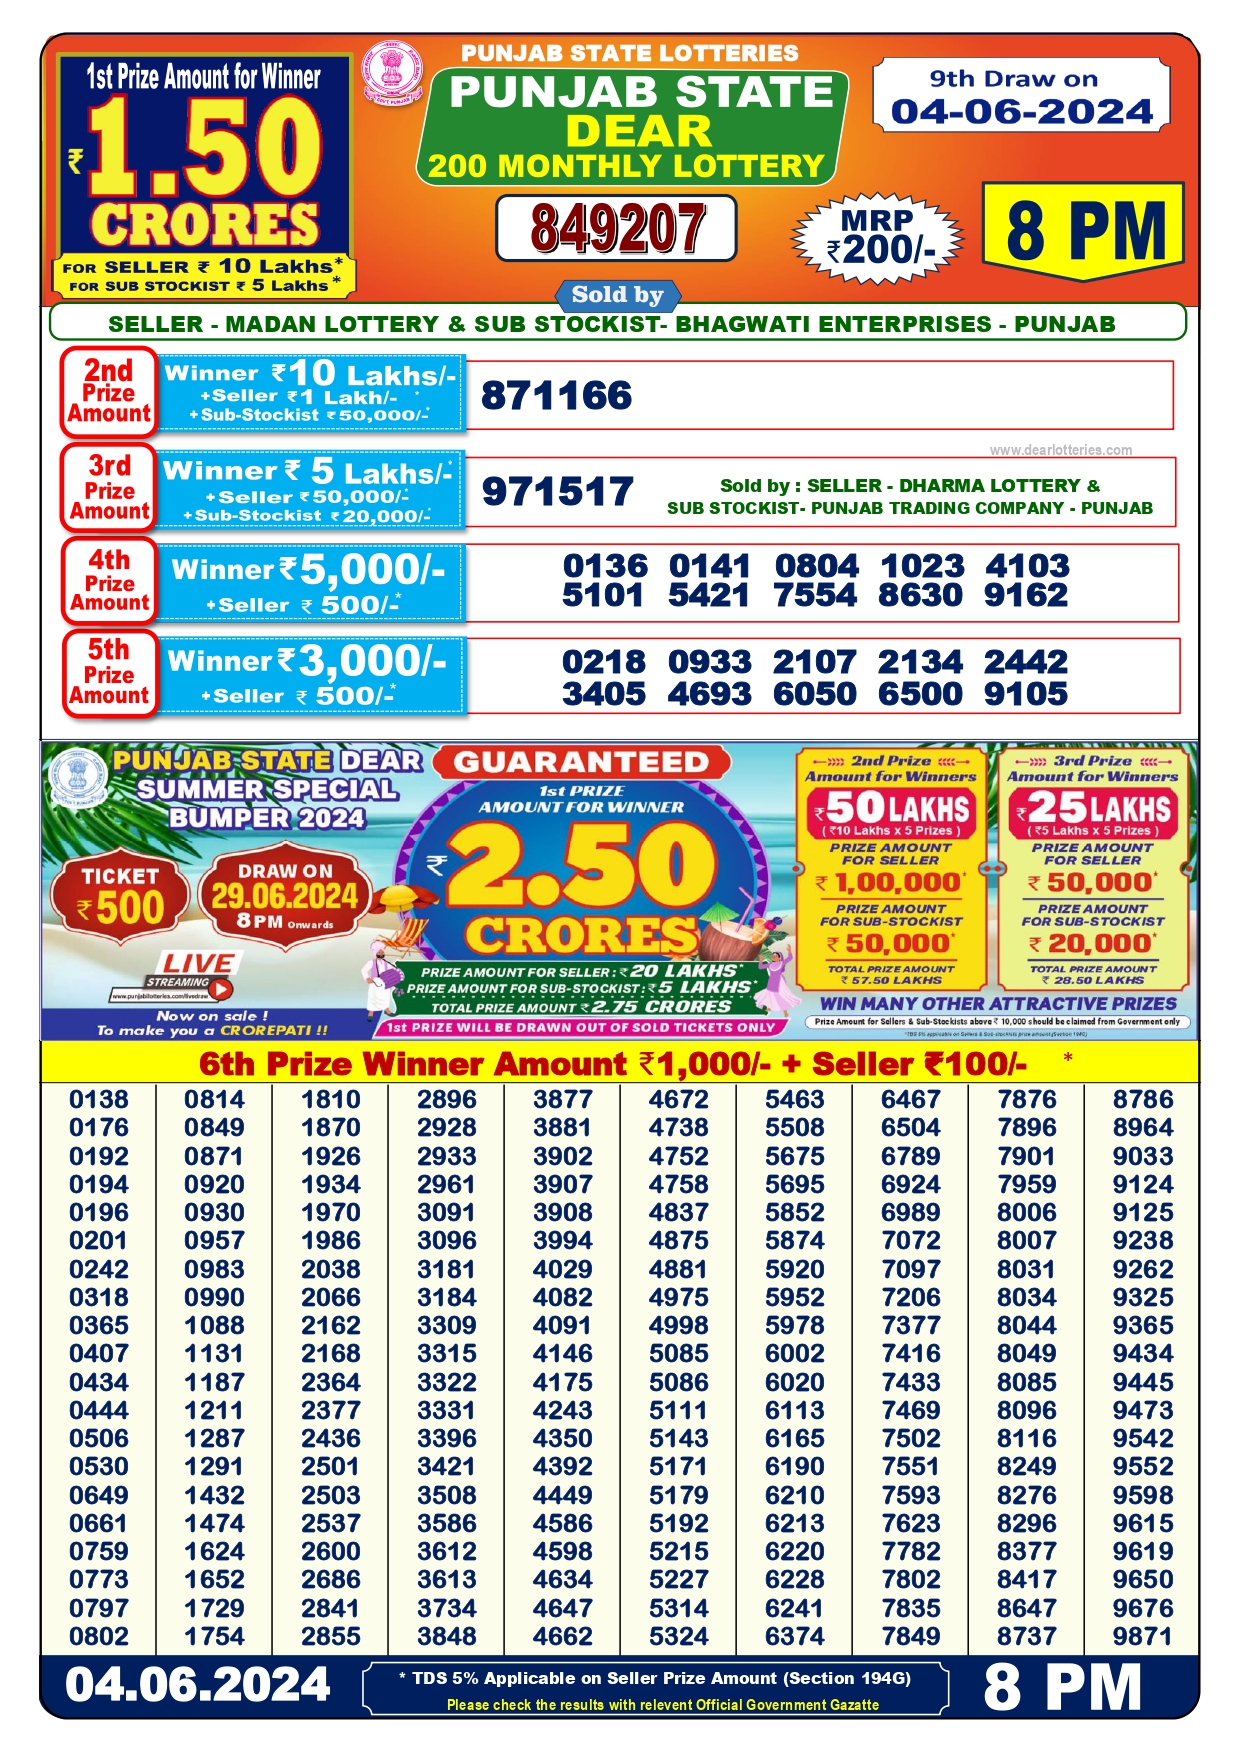 dear 200 monthly lottery result today